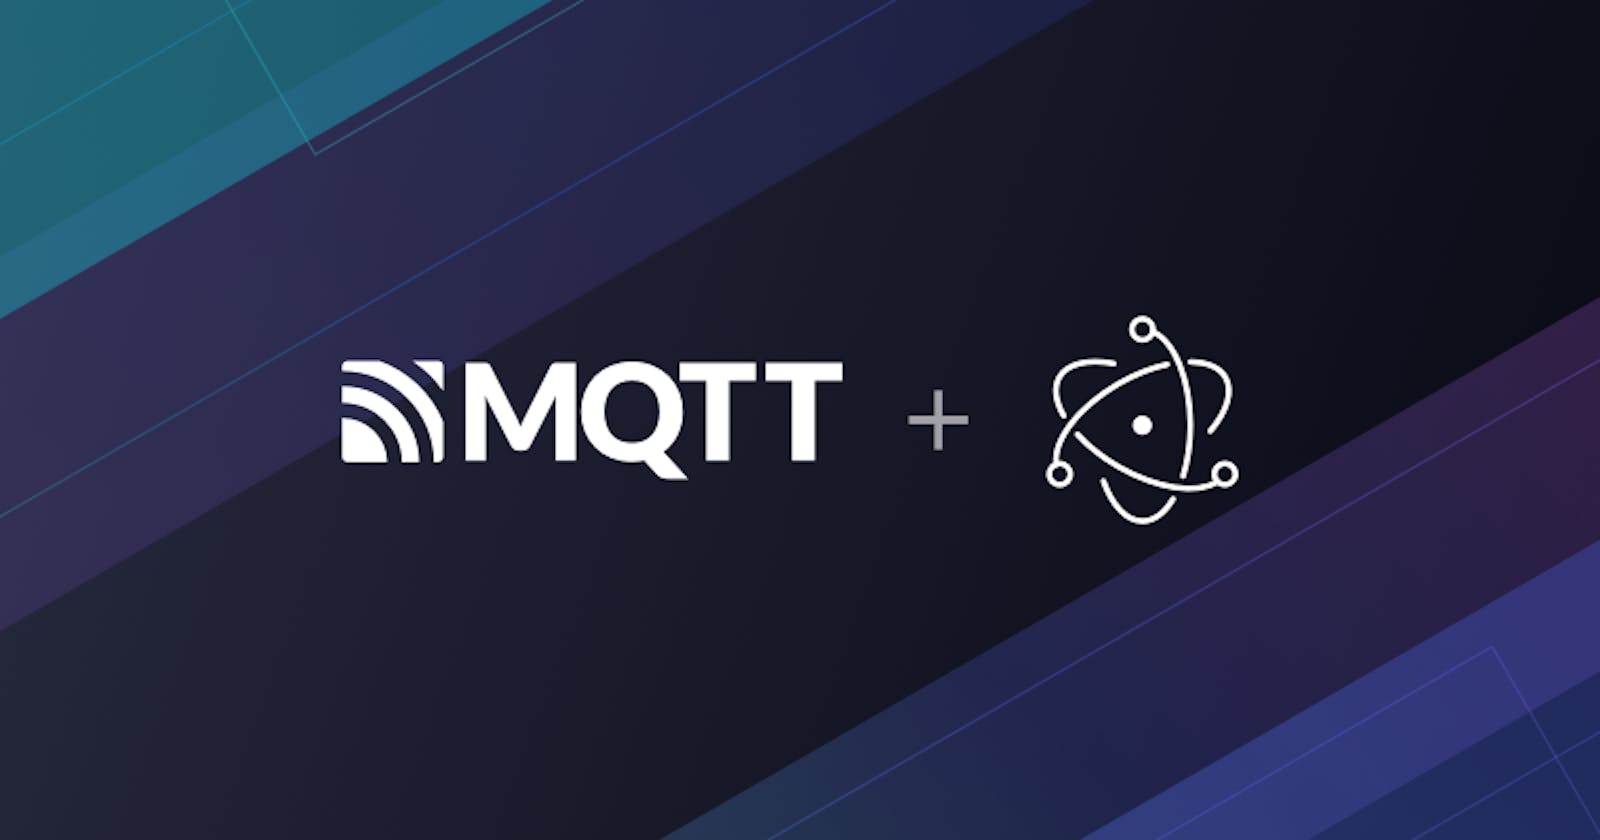 How to Use MQTT in the Electron Project